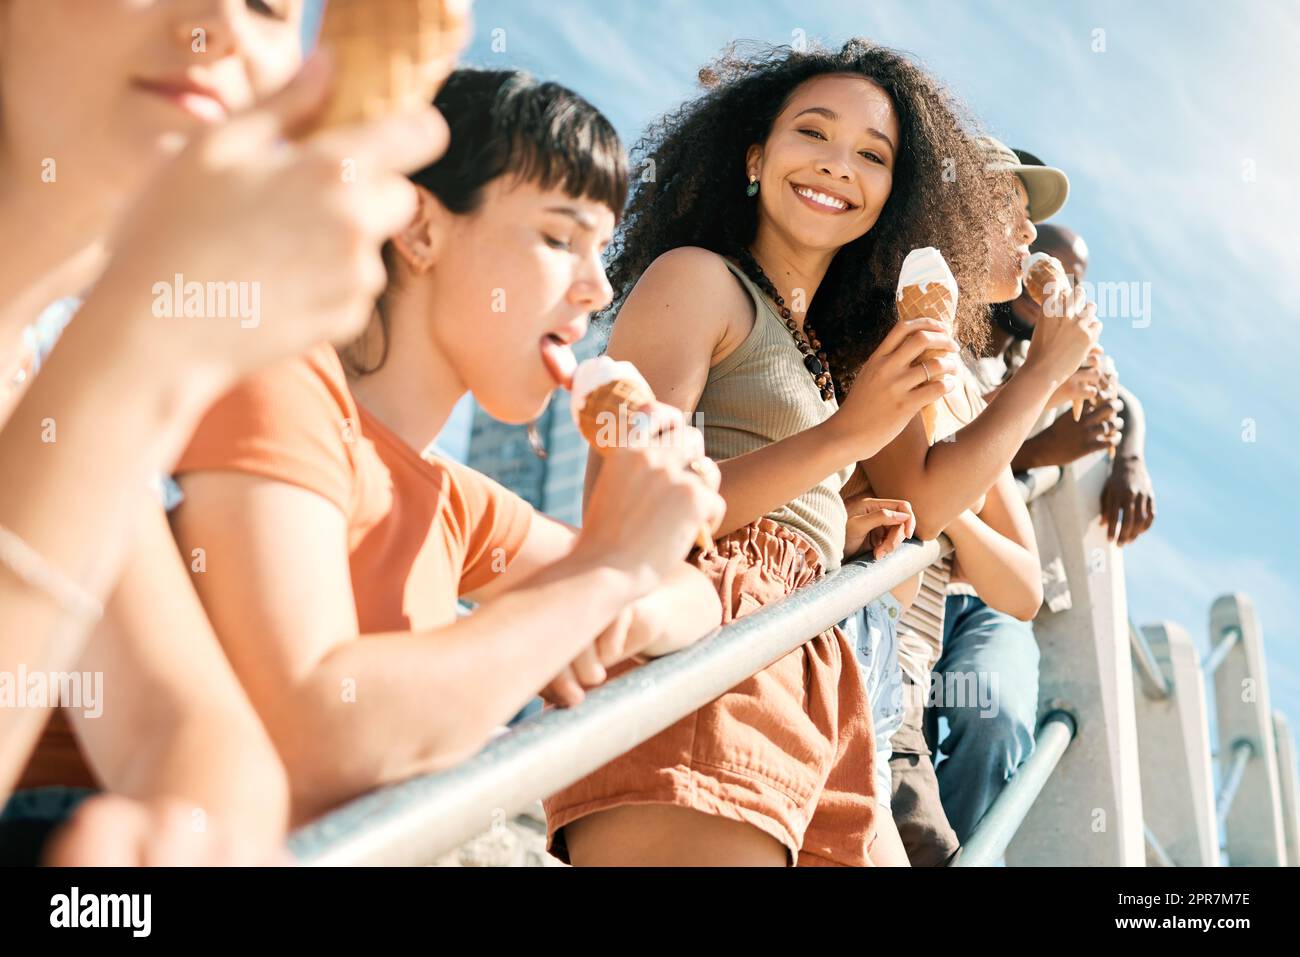 The best day ever. Cropped portrait of an attractive young woman enjoying an ice cream on the beach with her girlfriends. Stock Photo